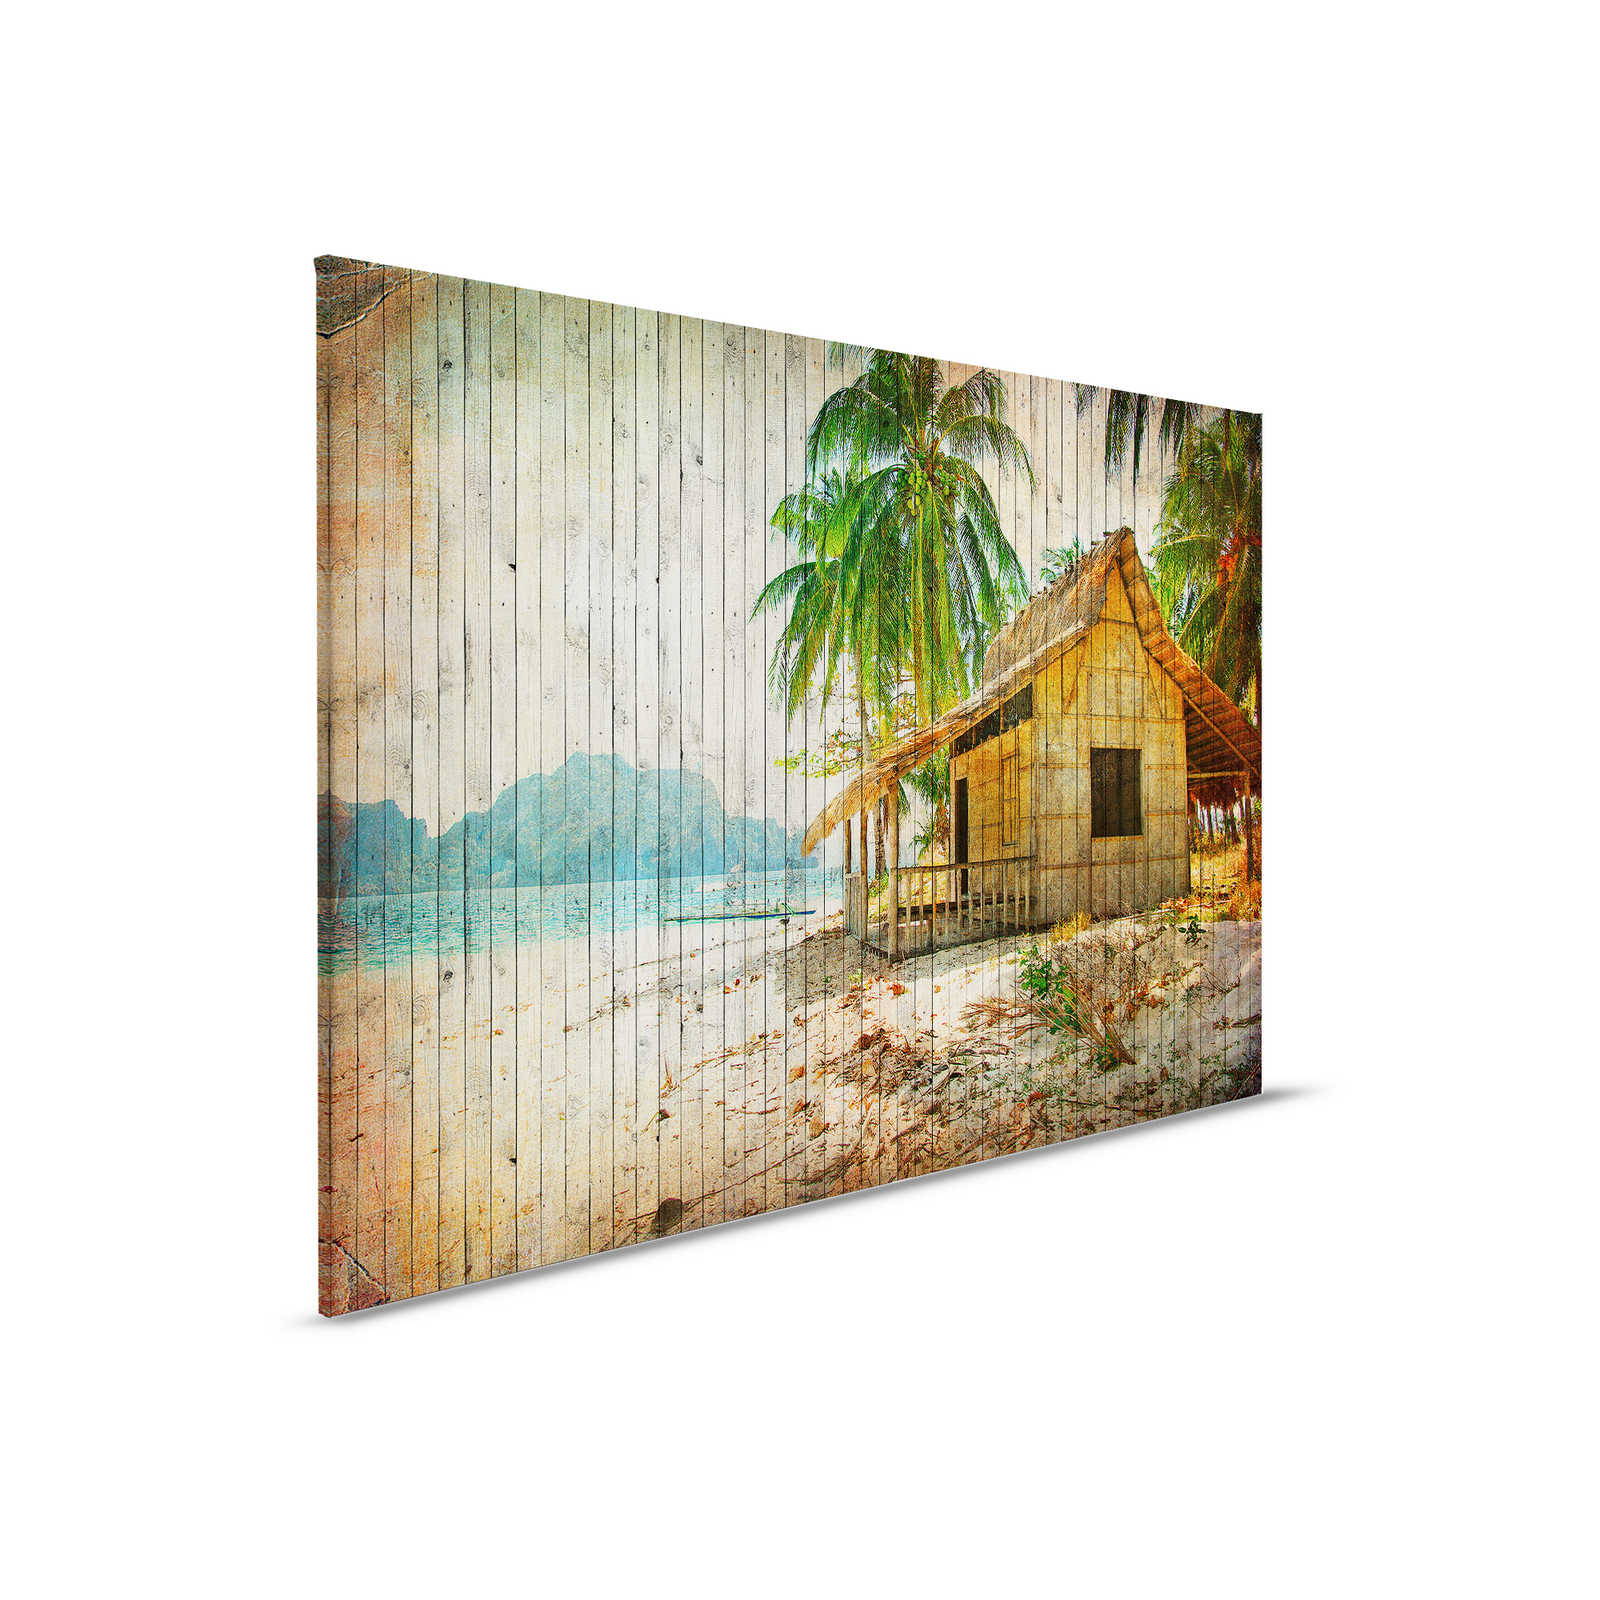         Tahiti 1 - South Seas beach canvas picture with board optics in wood panel - 0.90 m x 0.60 m
    